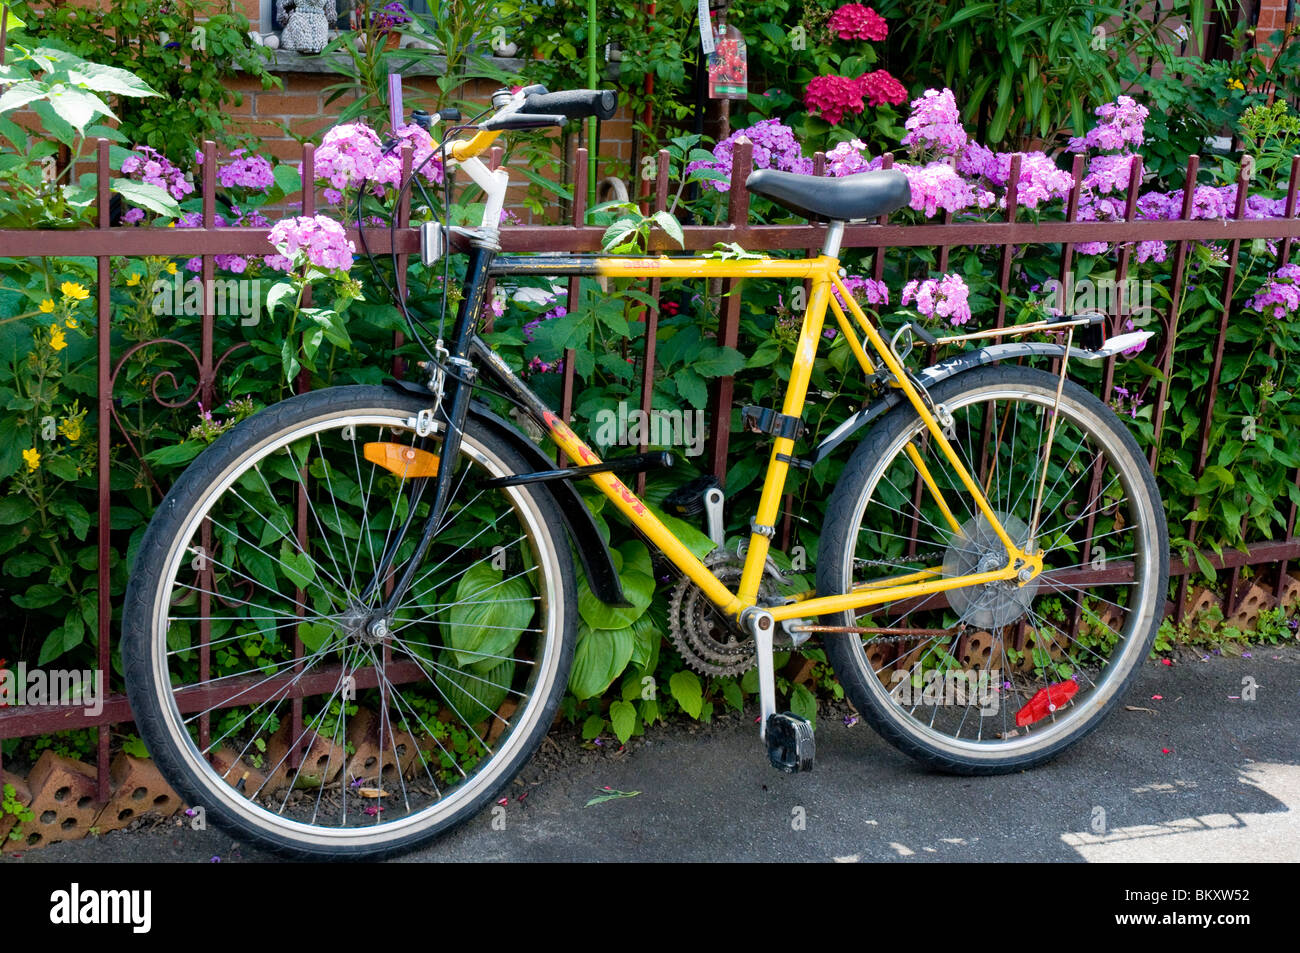 Bicycle parked in front of garden Stock Photo